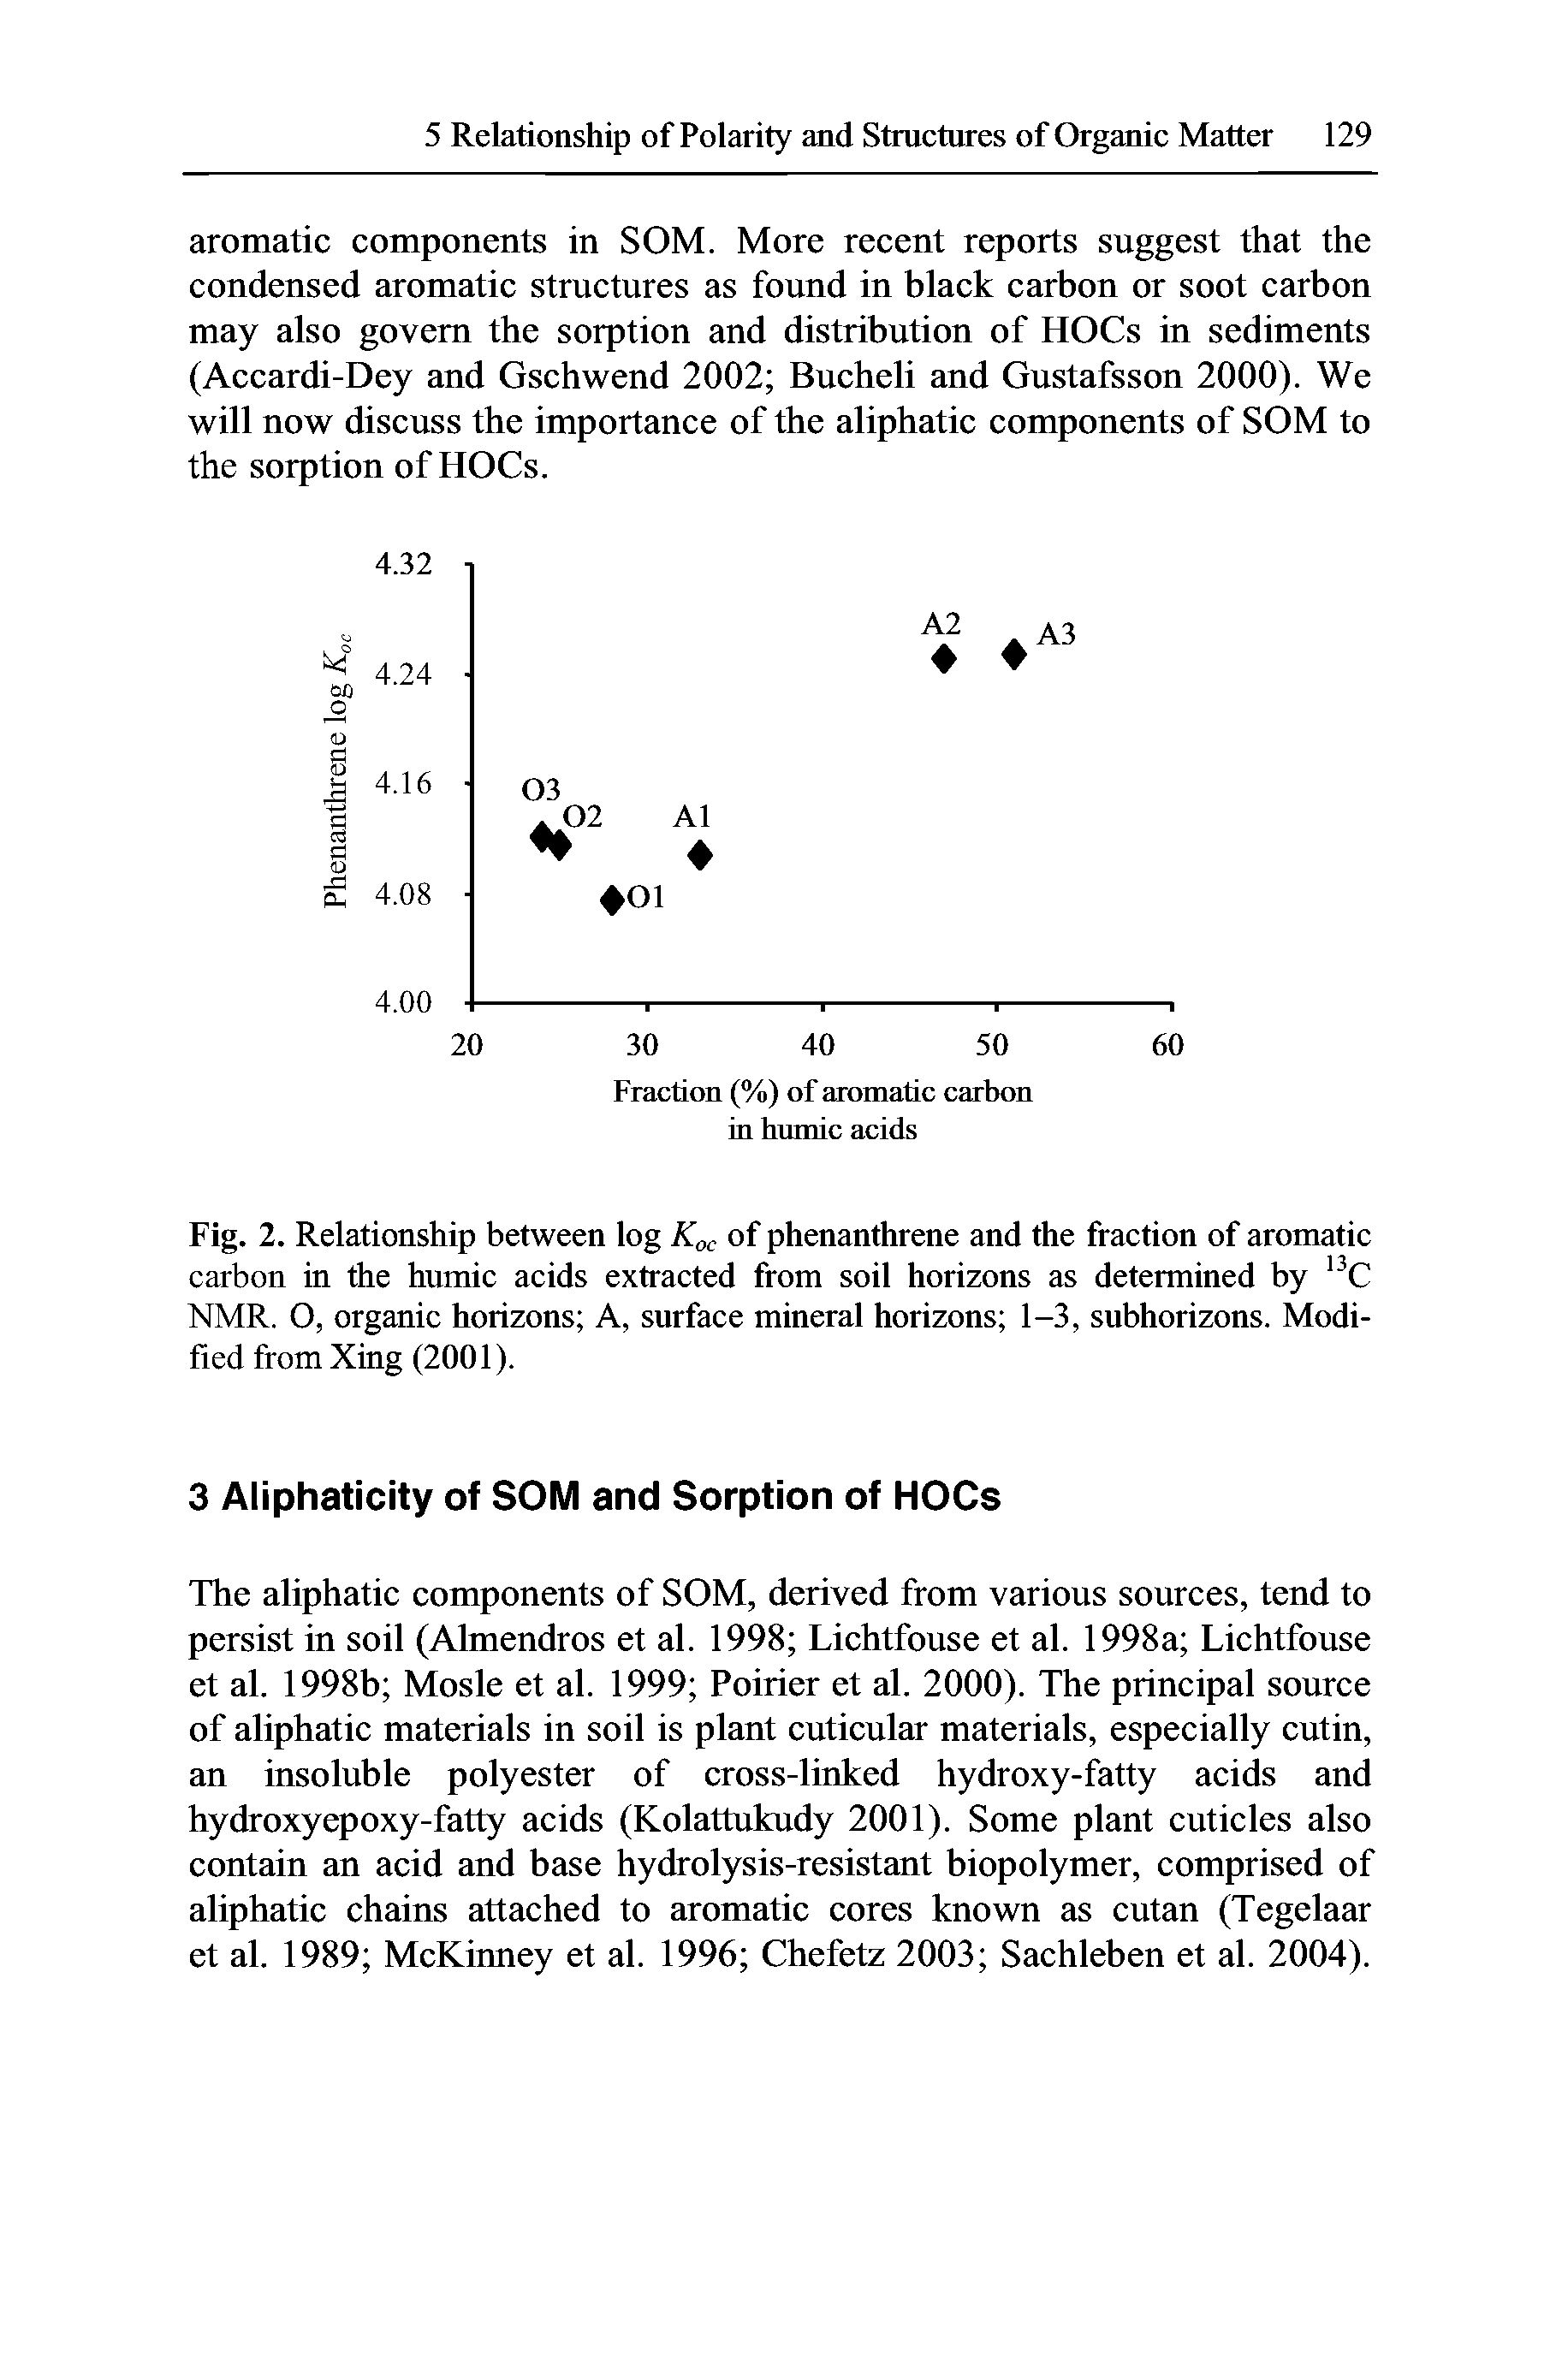 Fig. 2. Relationship between log Koc of phenanthrene and the fraction of aromatic carbon in the humic acids extracted from soil horizons as determined by 13C NMR. O, organic horizons A, surface mineral horizons 1-3, subhorizons. Modified from Xing (2001).